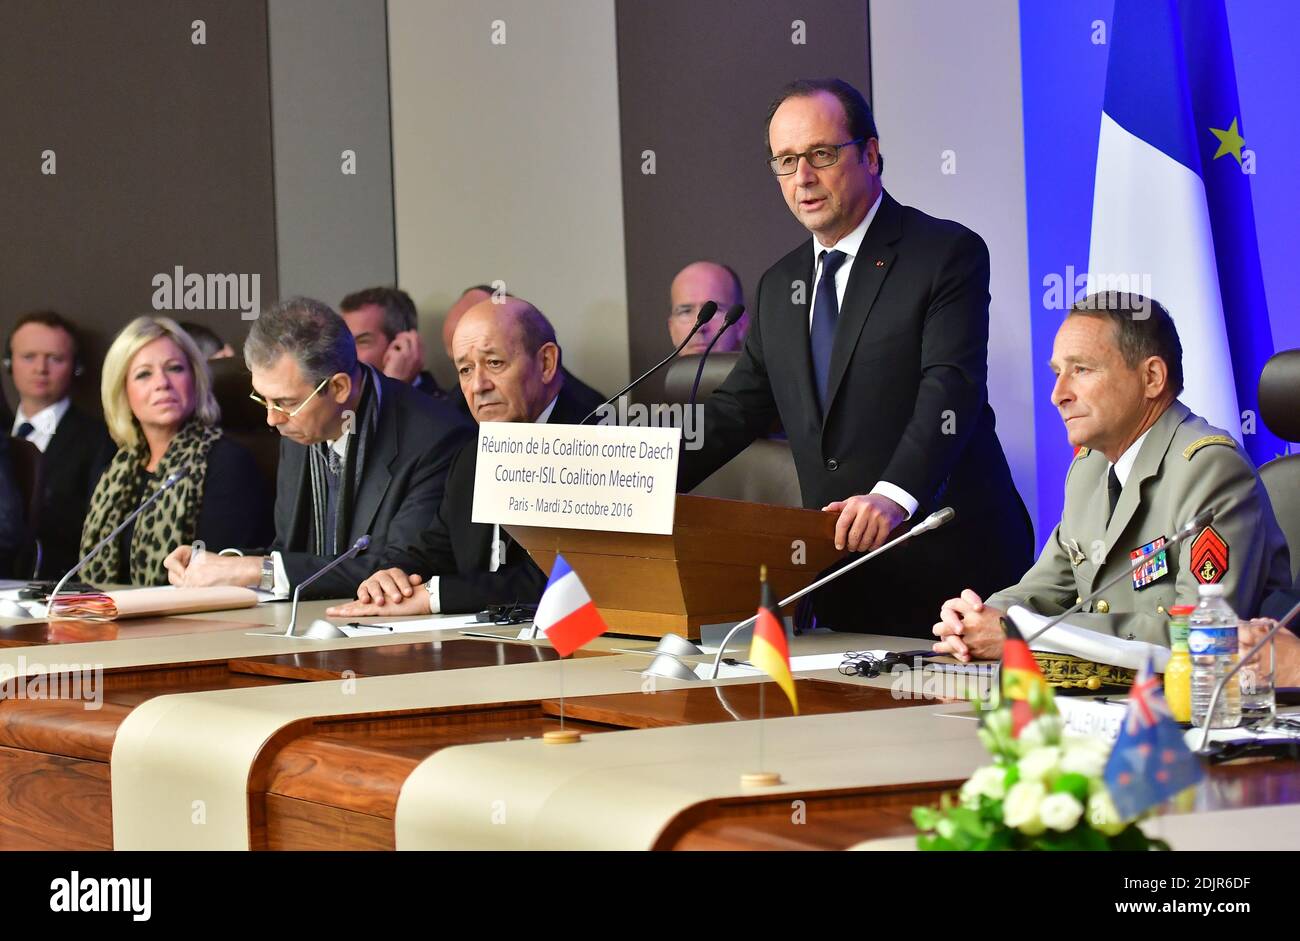 French President Francois Hollande delivers his speech during the opening of a Counter-ISIL Coalition Meeting hosted by French Minister of Defence Jean-Yves Le Drian and attended by the Defence Ministers of the Coalition in Iraq and Syria, Ashton Carter (USA), Michael Fallon (UK), Jeanine Hennis-Plasschaert (Netherlands), Marise Payne (Australia), Roberta Pinotti (Italy), Ursula Von Der Leyen (Germany), Pedro Morenes (Spain), Peter Christensen (Denmark), Ine Marie Eriksen Soreide (Norway), Steven Vandeput (Belgium), Gerry Brownlee (New Zealand) and Harjit Sajjan (Canada), held at the French Mi Stock Photo